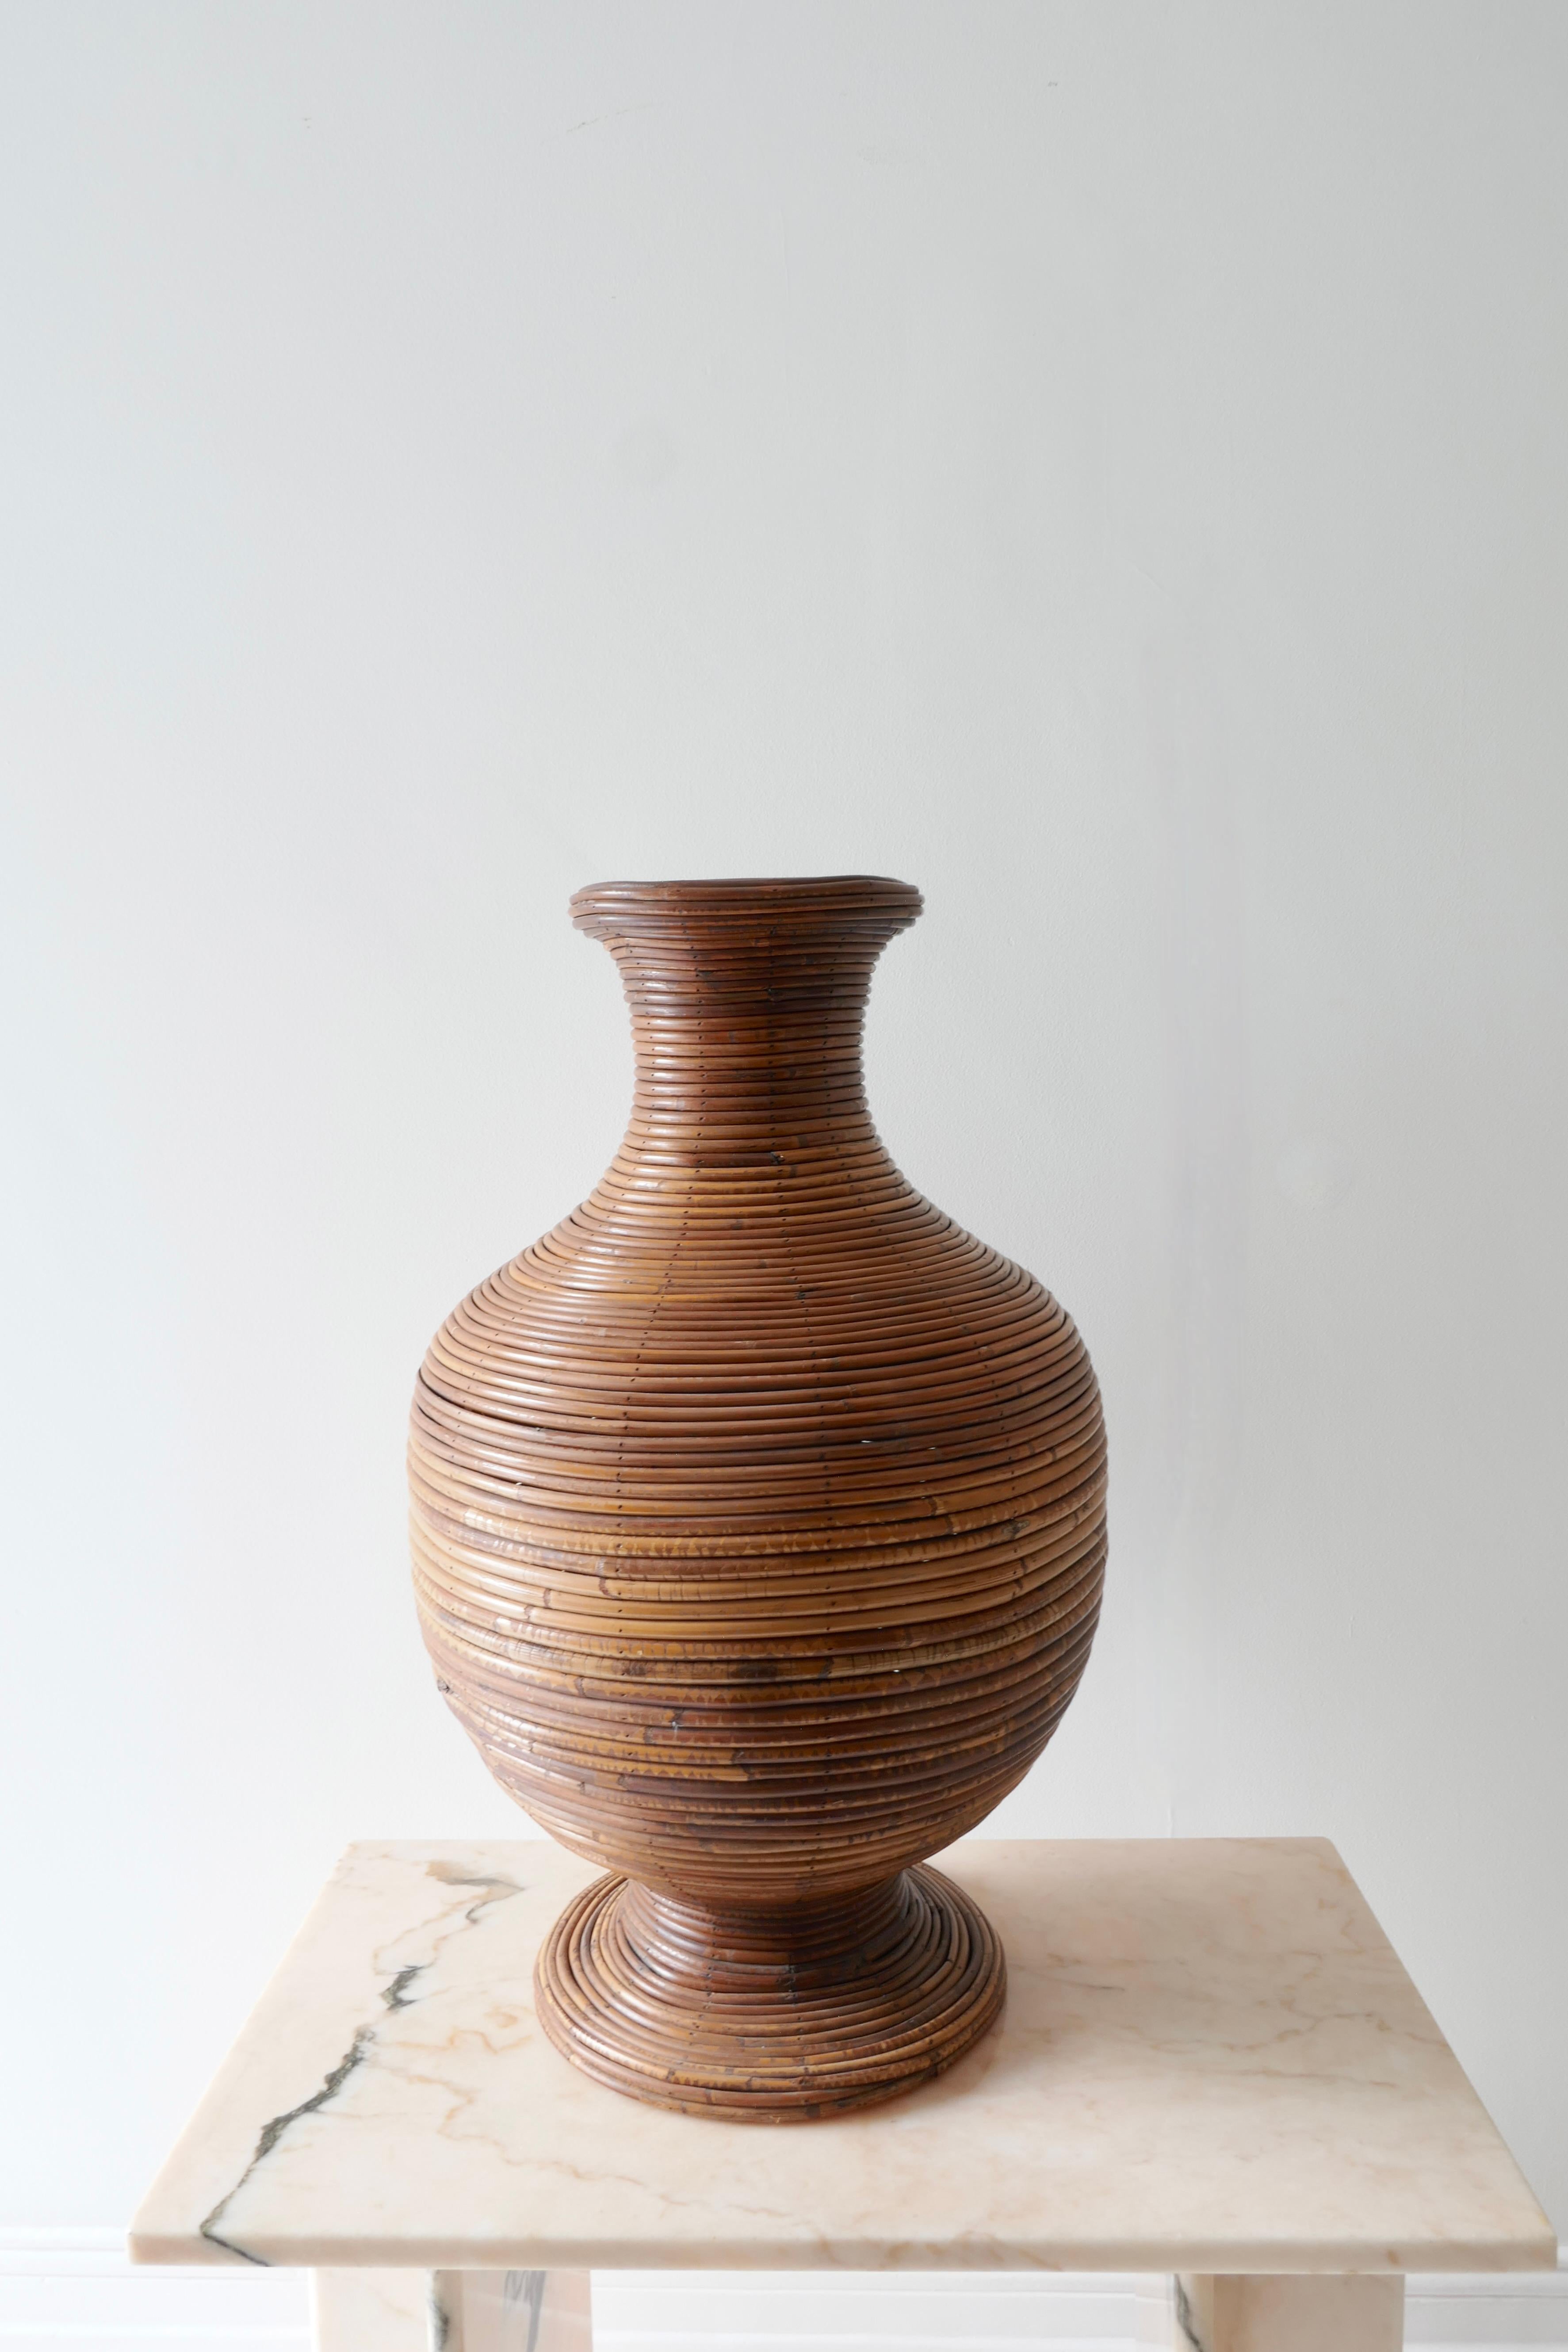 Large Pencil Reed Rattan Floor Vase, Italy 1960s For Sale 2